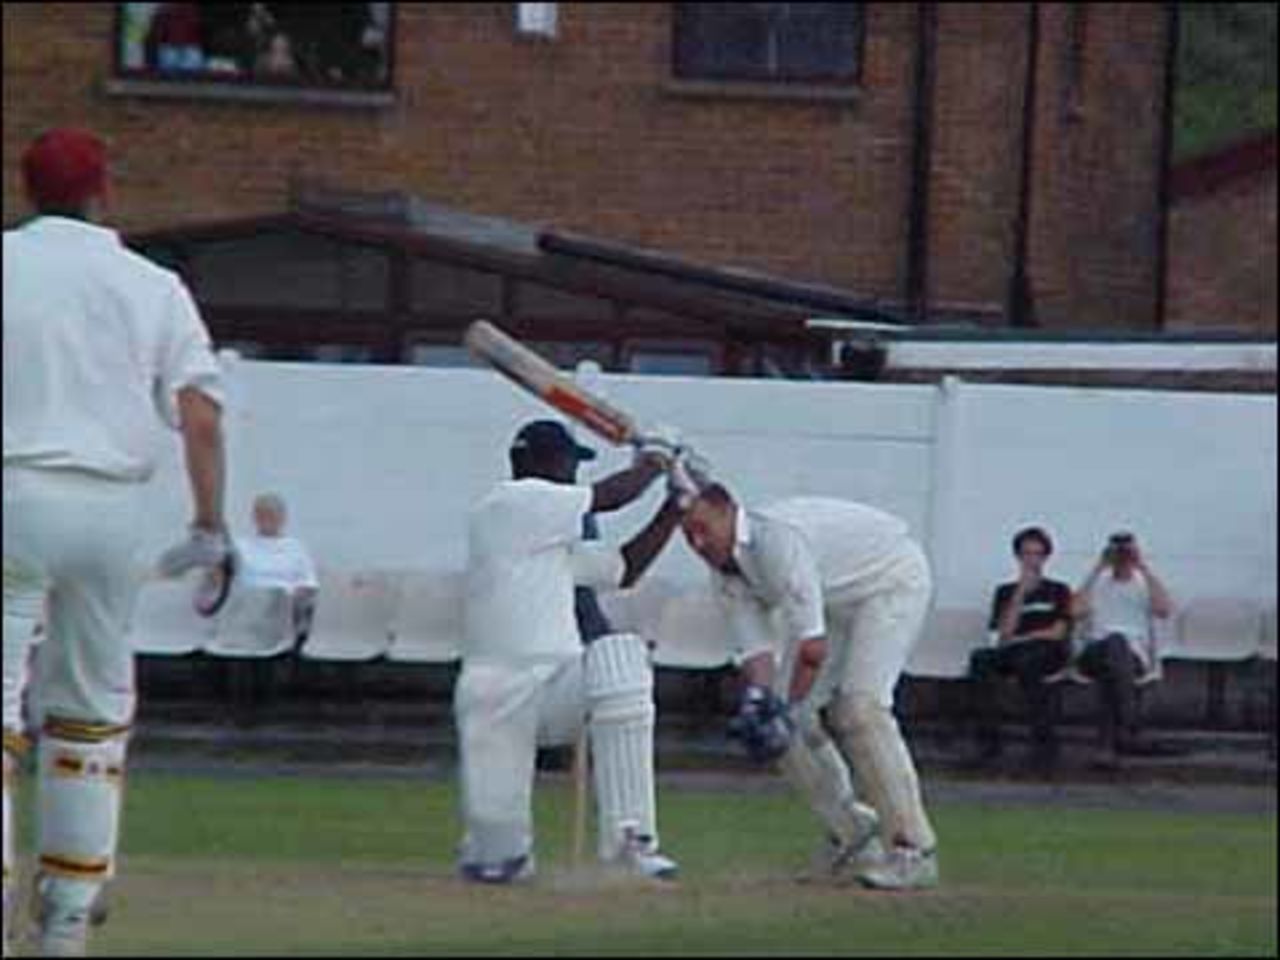 Ottis Gibson hit an unbeaten 103 to take Haslingden to the final of the Inter League Challenge Trophy by beating holders Rochdale by 6 wickets at Bentgate on July 19th